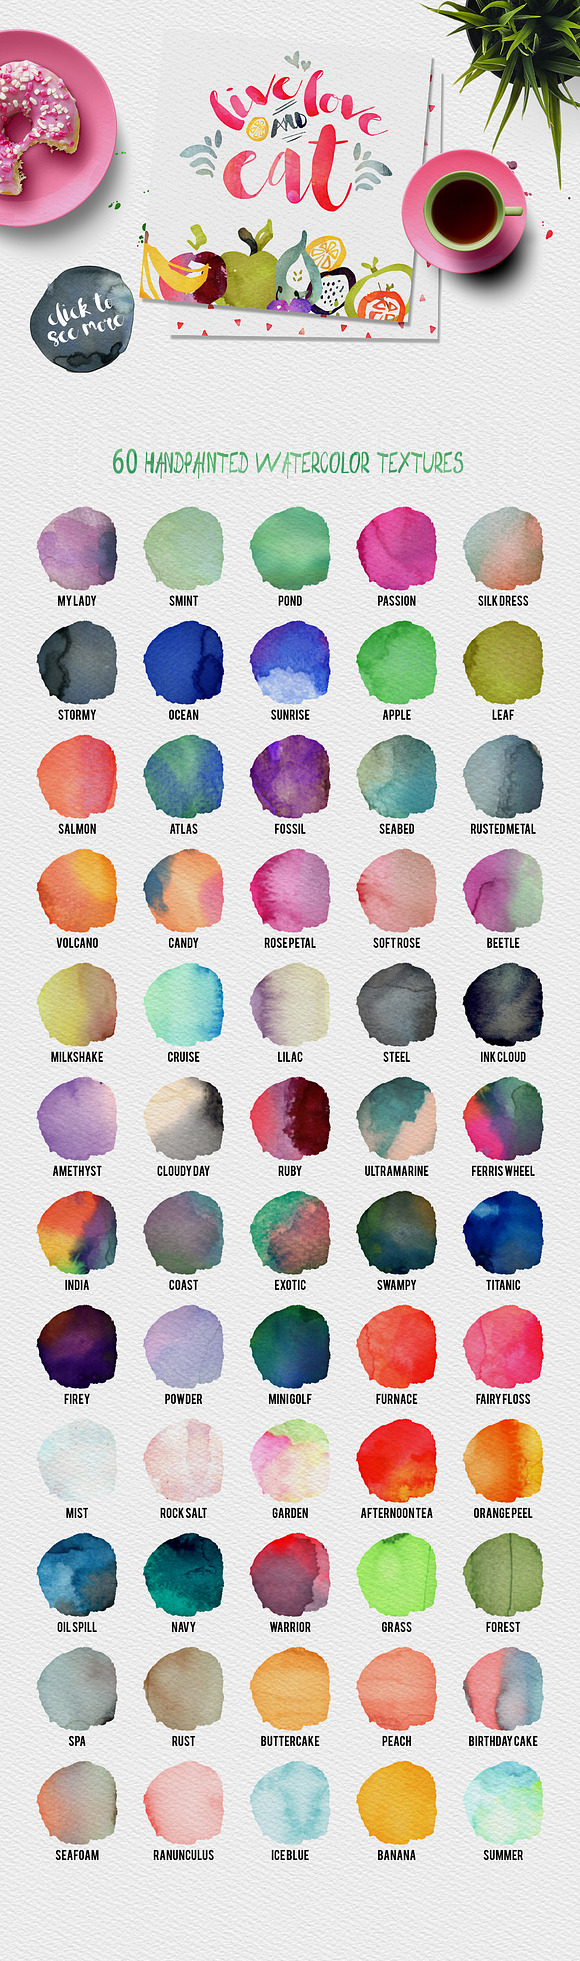 Wonderful Watercolor Design Pack in Textures - product preview 1